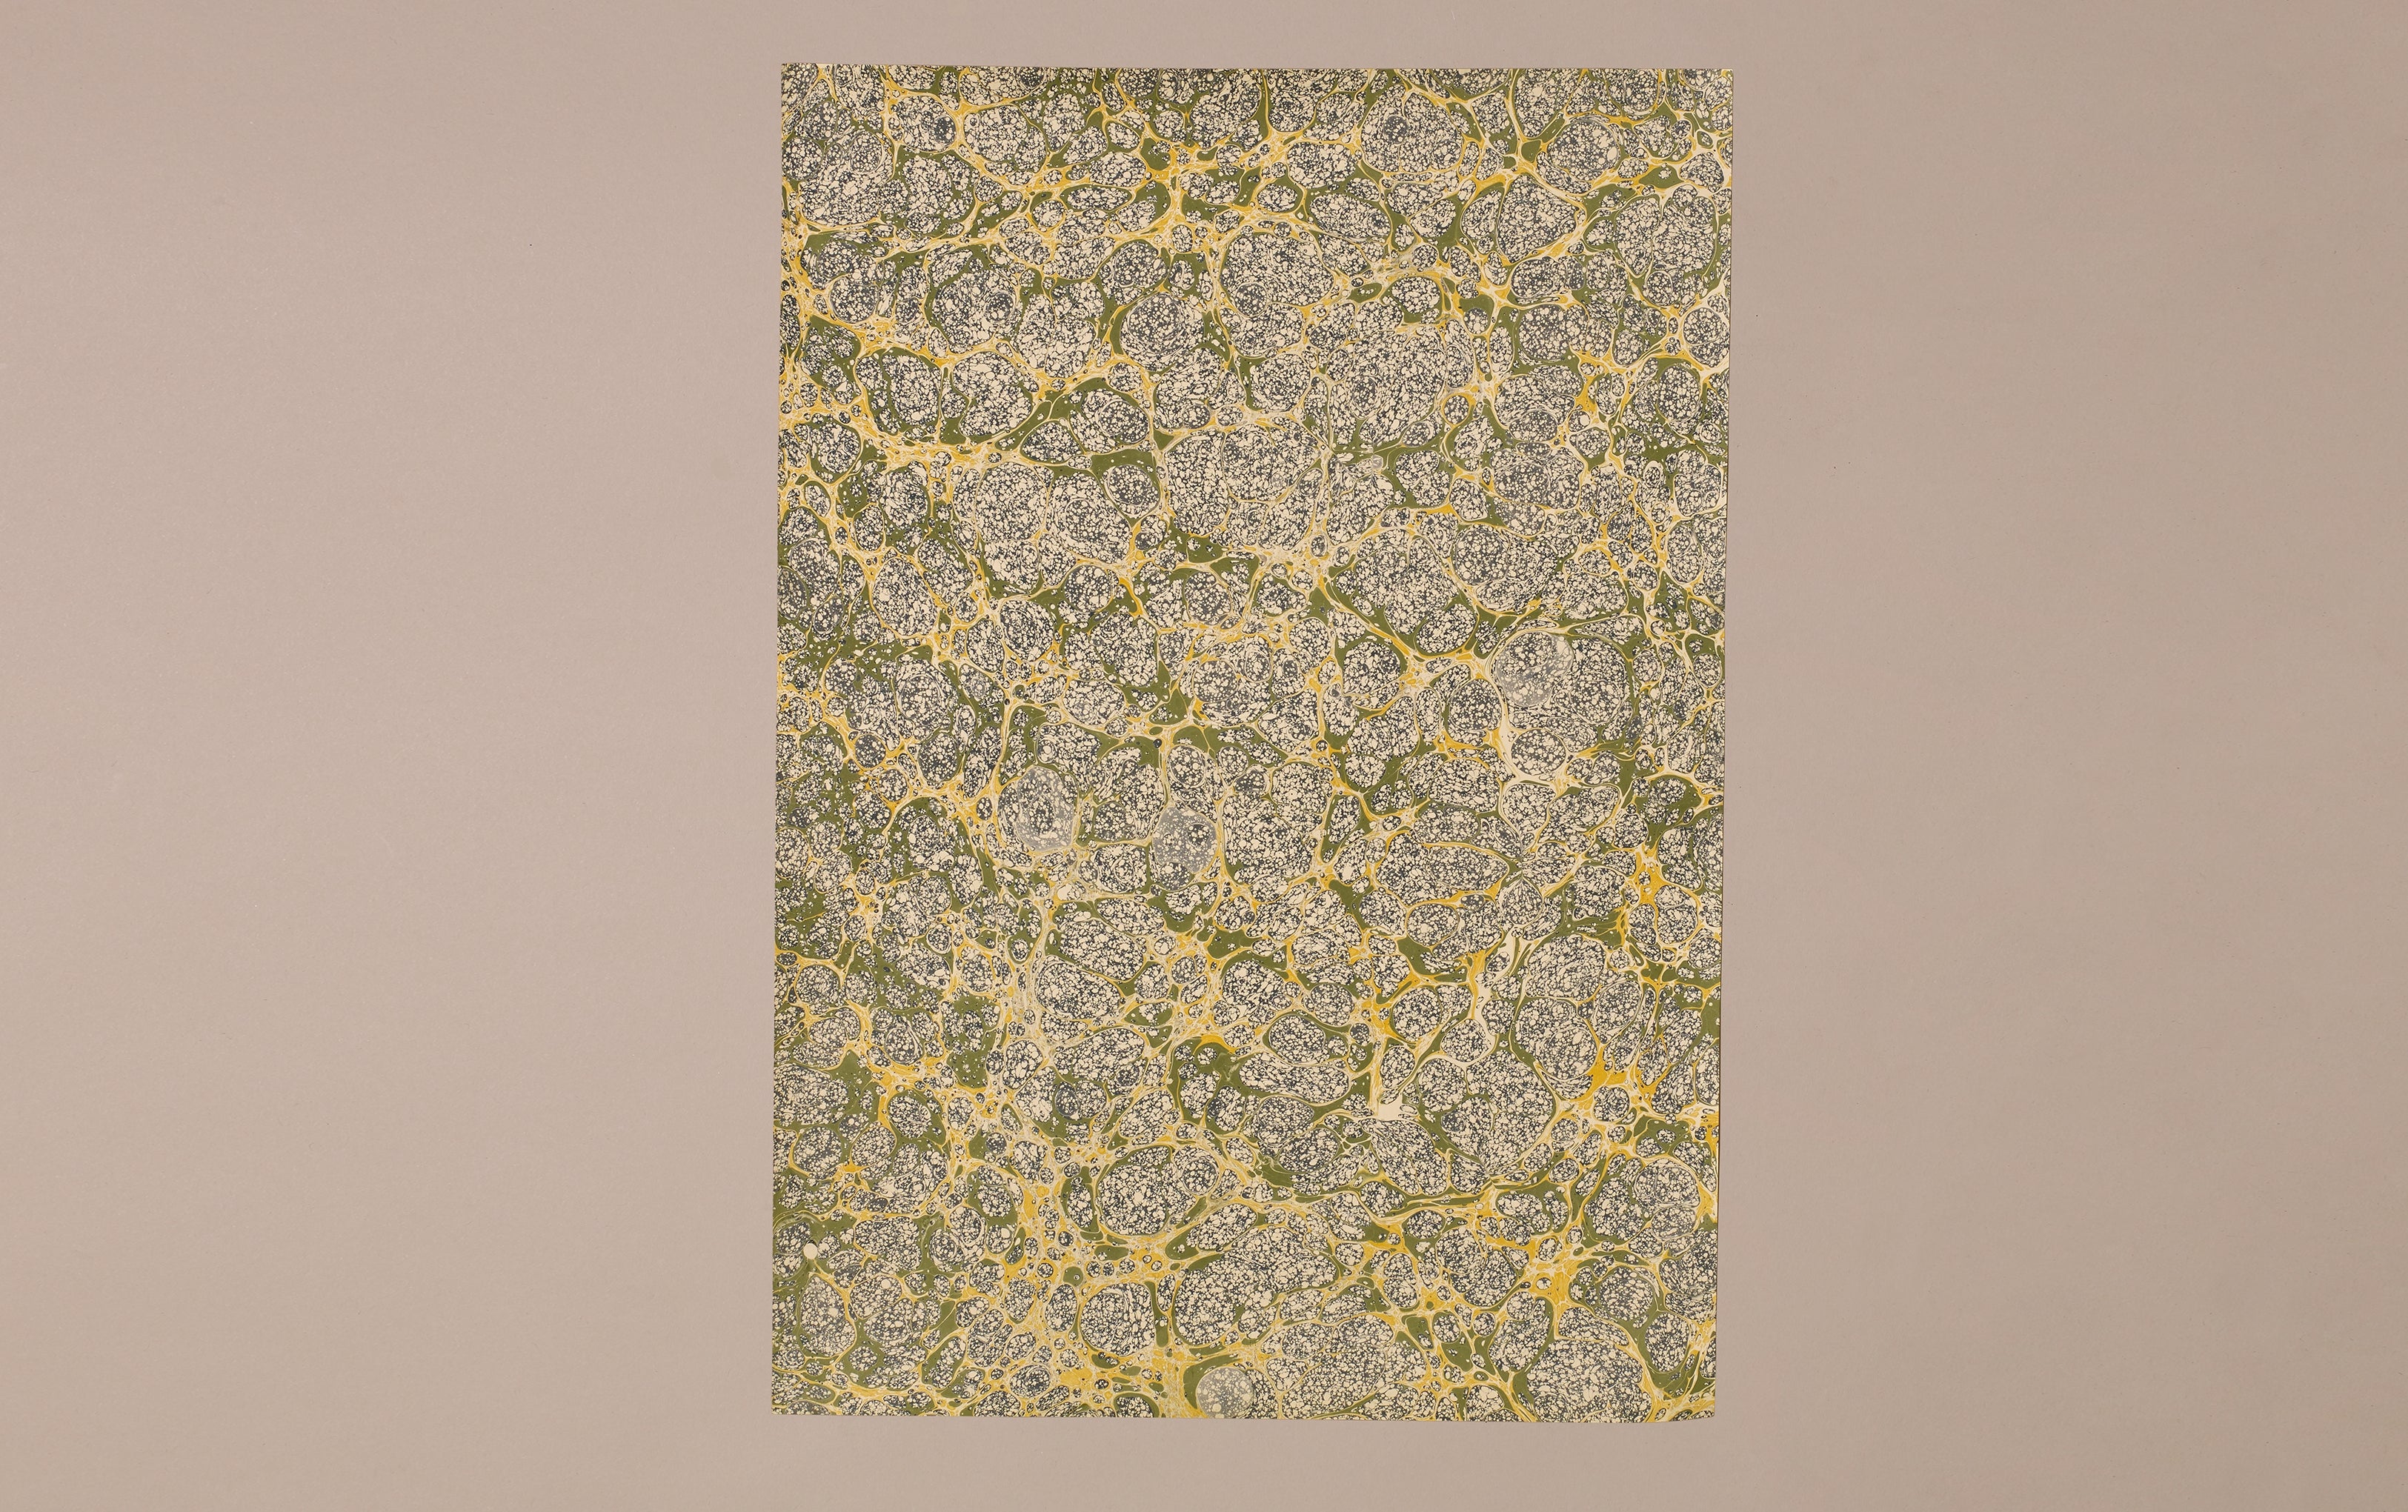 Hand Marbled Paper Sheet, Green and Yellow Cells